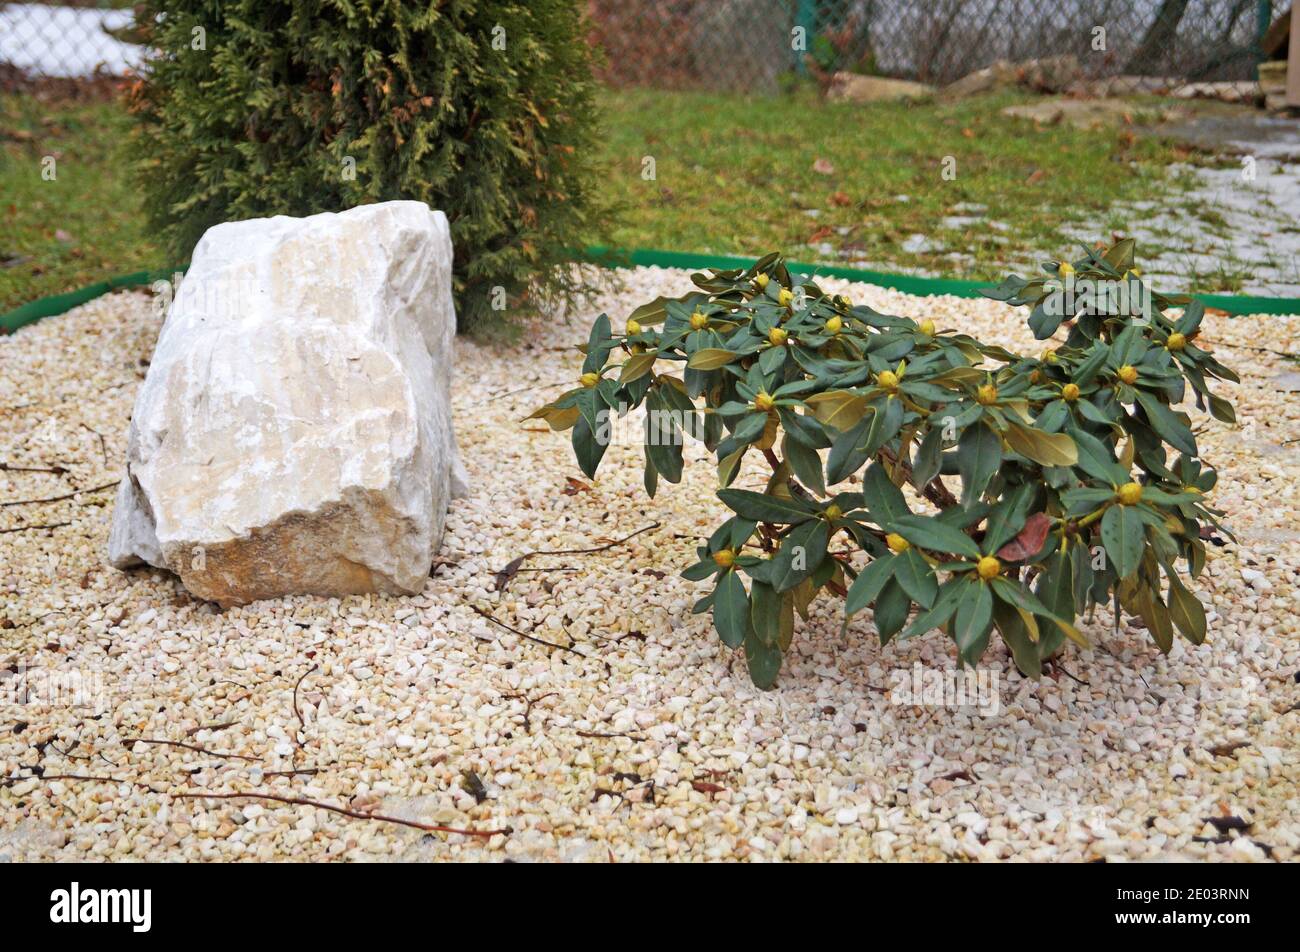 Ornamental bushes of rhododendron and thuja grow on a flower bed strewn with white pebbles on a spring day Stock Photo